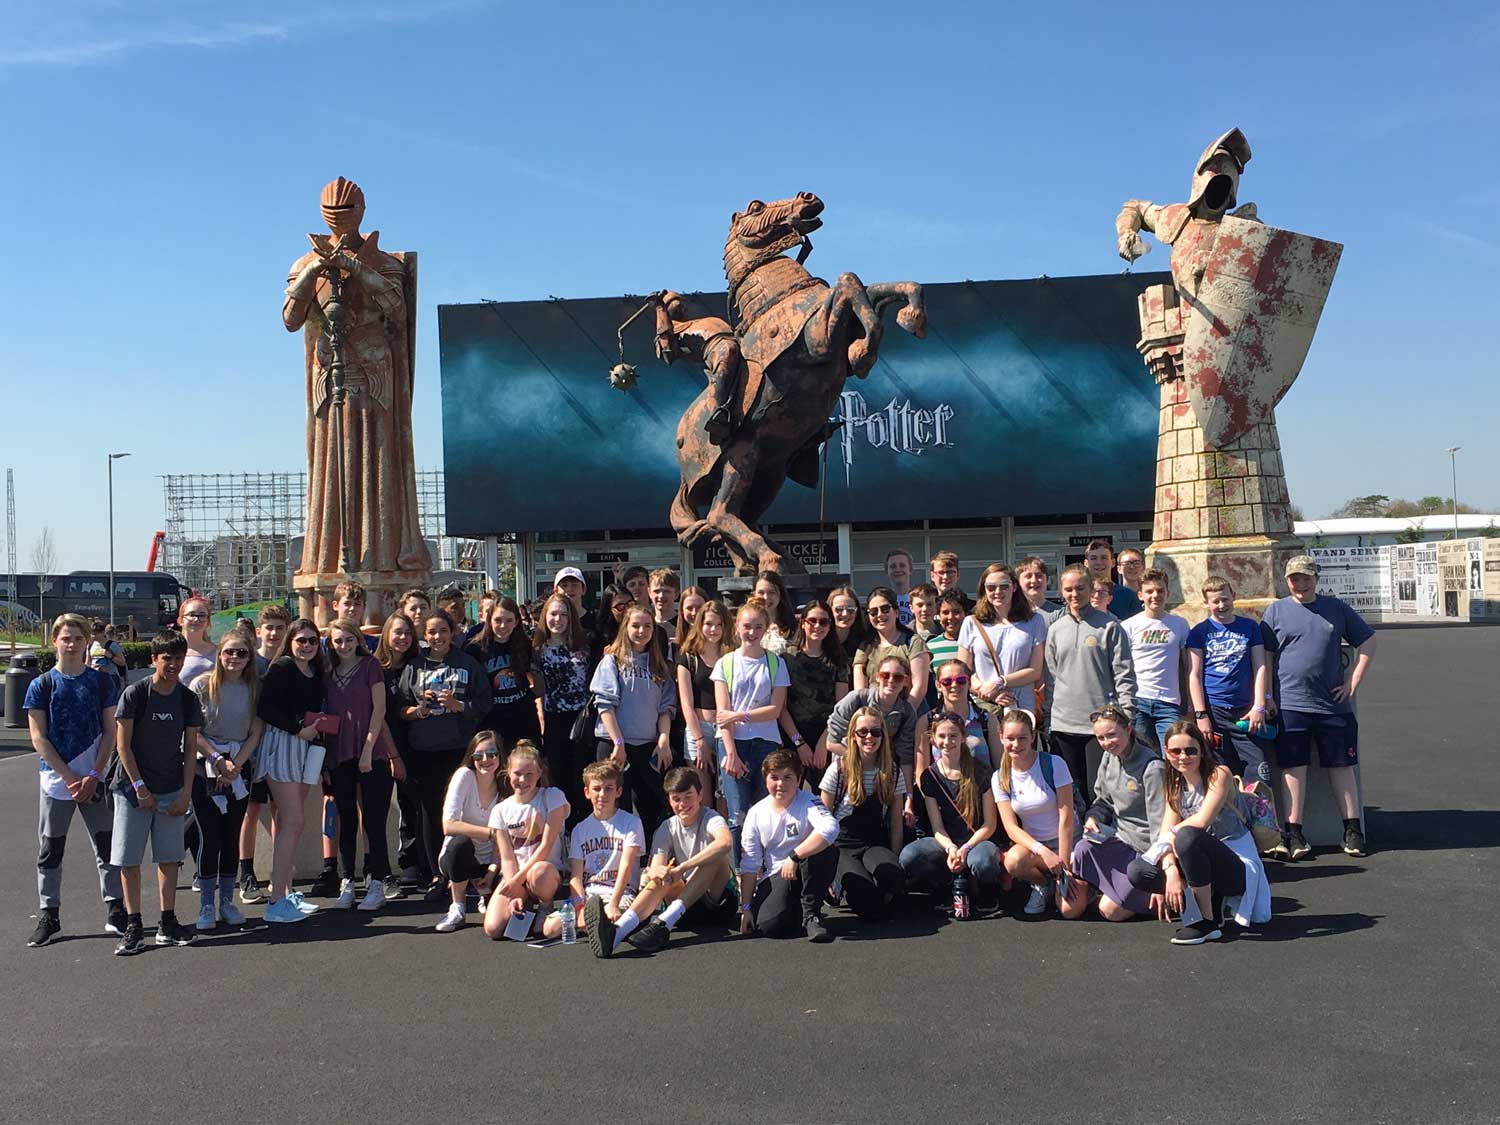 Students from Falmouth School in Maine visited the Warner Bros Studio Tour near London as a special treat during their exchange trip to Rossett School, Harrogate